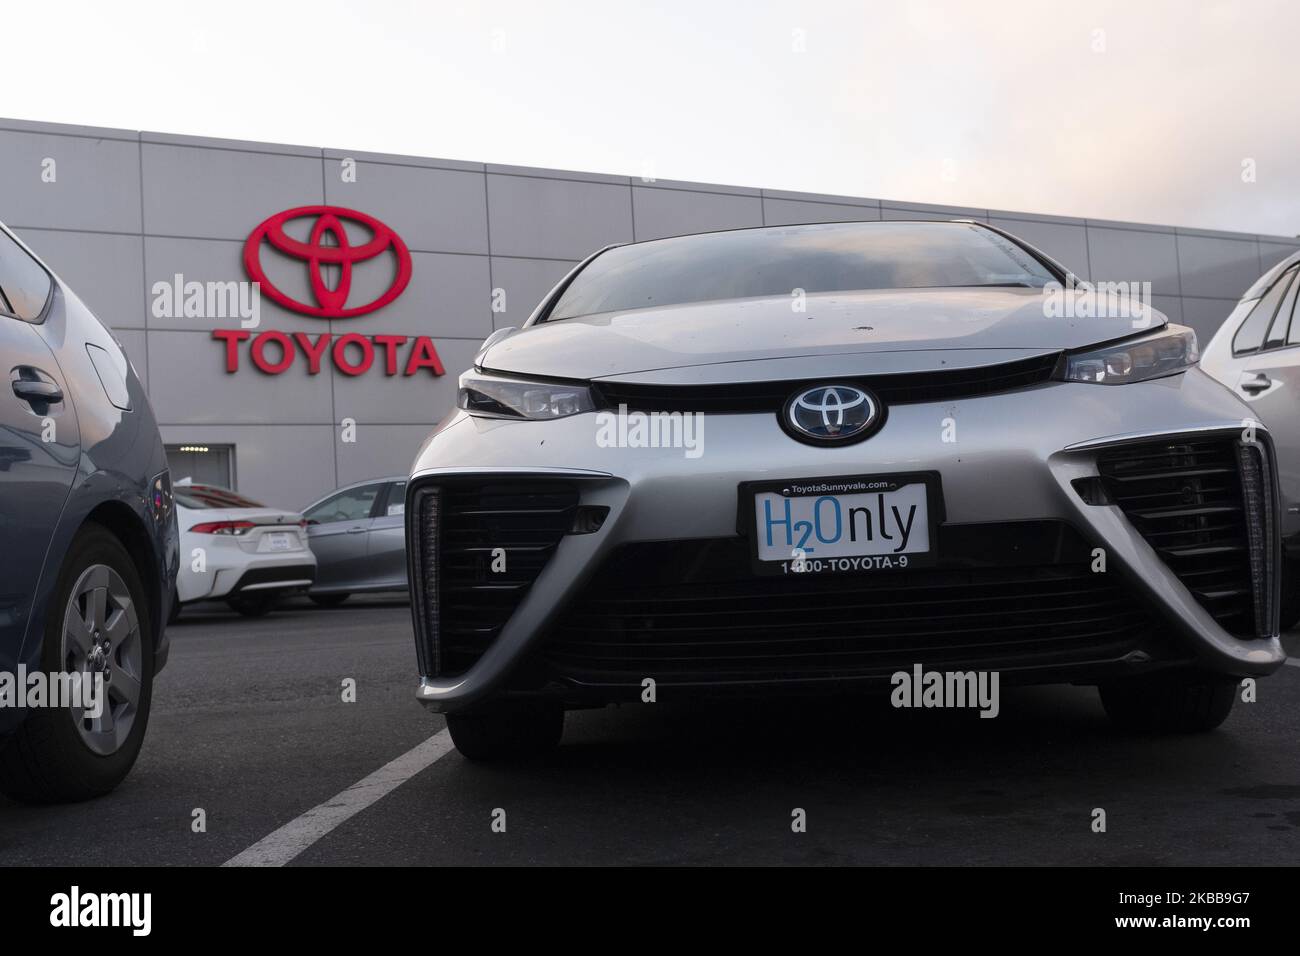 Toyota Mirai hydrogen fuel cell car. is seen at a car dealership in San Jose, California, United States on Tuesday, November 19, 2019. Toyota has supported President Donald Trump's plan to bar California from setting its own vehicle emissions rules. California governor Gavin Newsom said on Monday it will halt all purchases of new vehicles for state government fleets from GM, Toyota and Fiat Chrysler. (Photo by Yichuan Cao/NurPhoto) Stock Photo